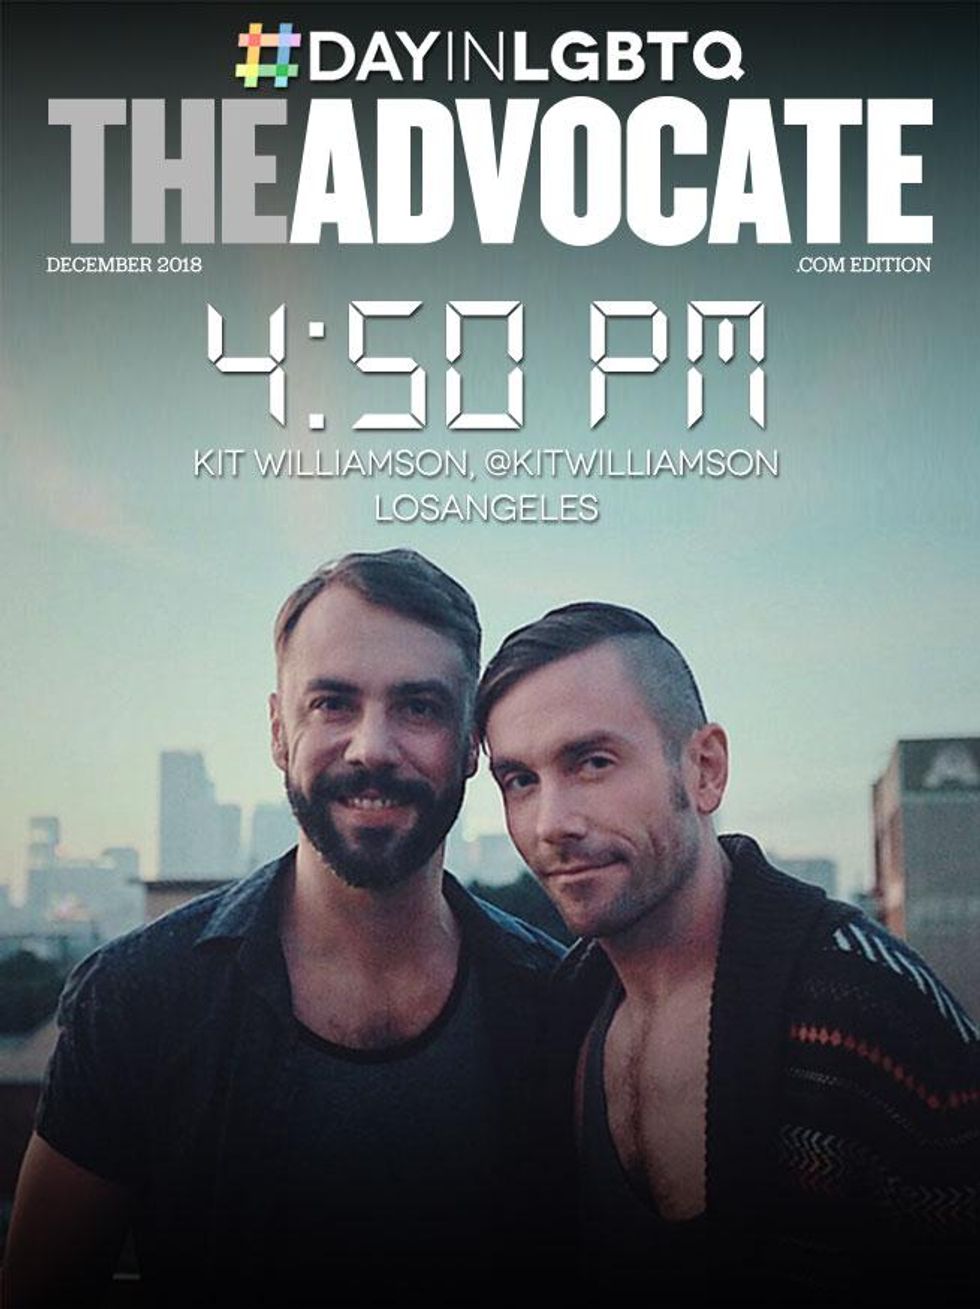 Pm-04-50-kitwilliamson-theadvocate-2018-dayinlgbt-cover-template-655